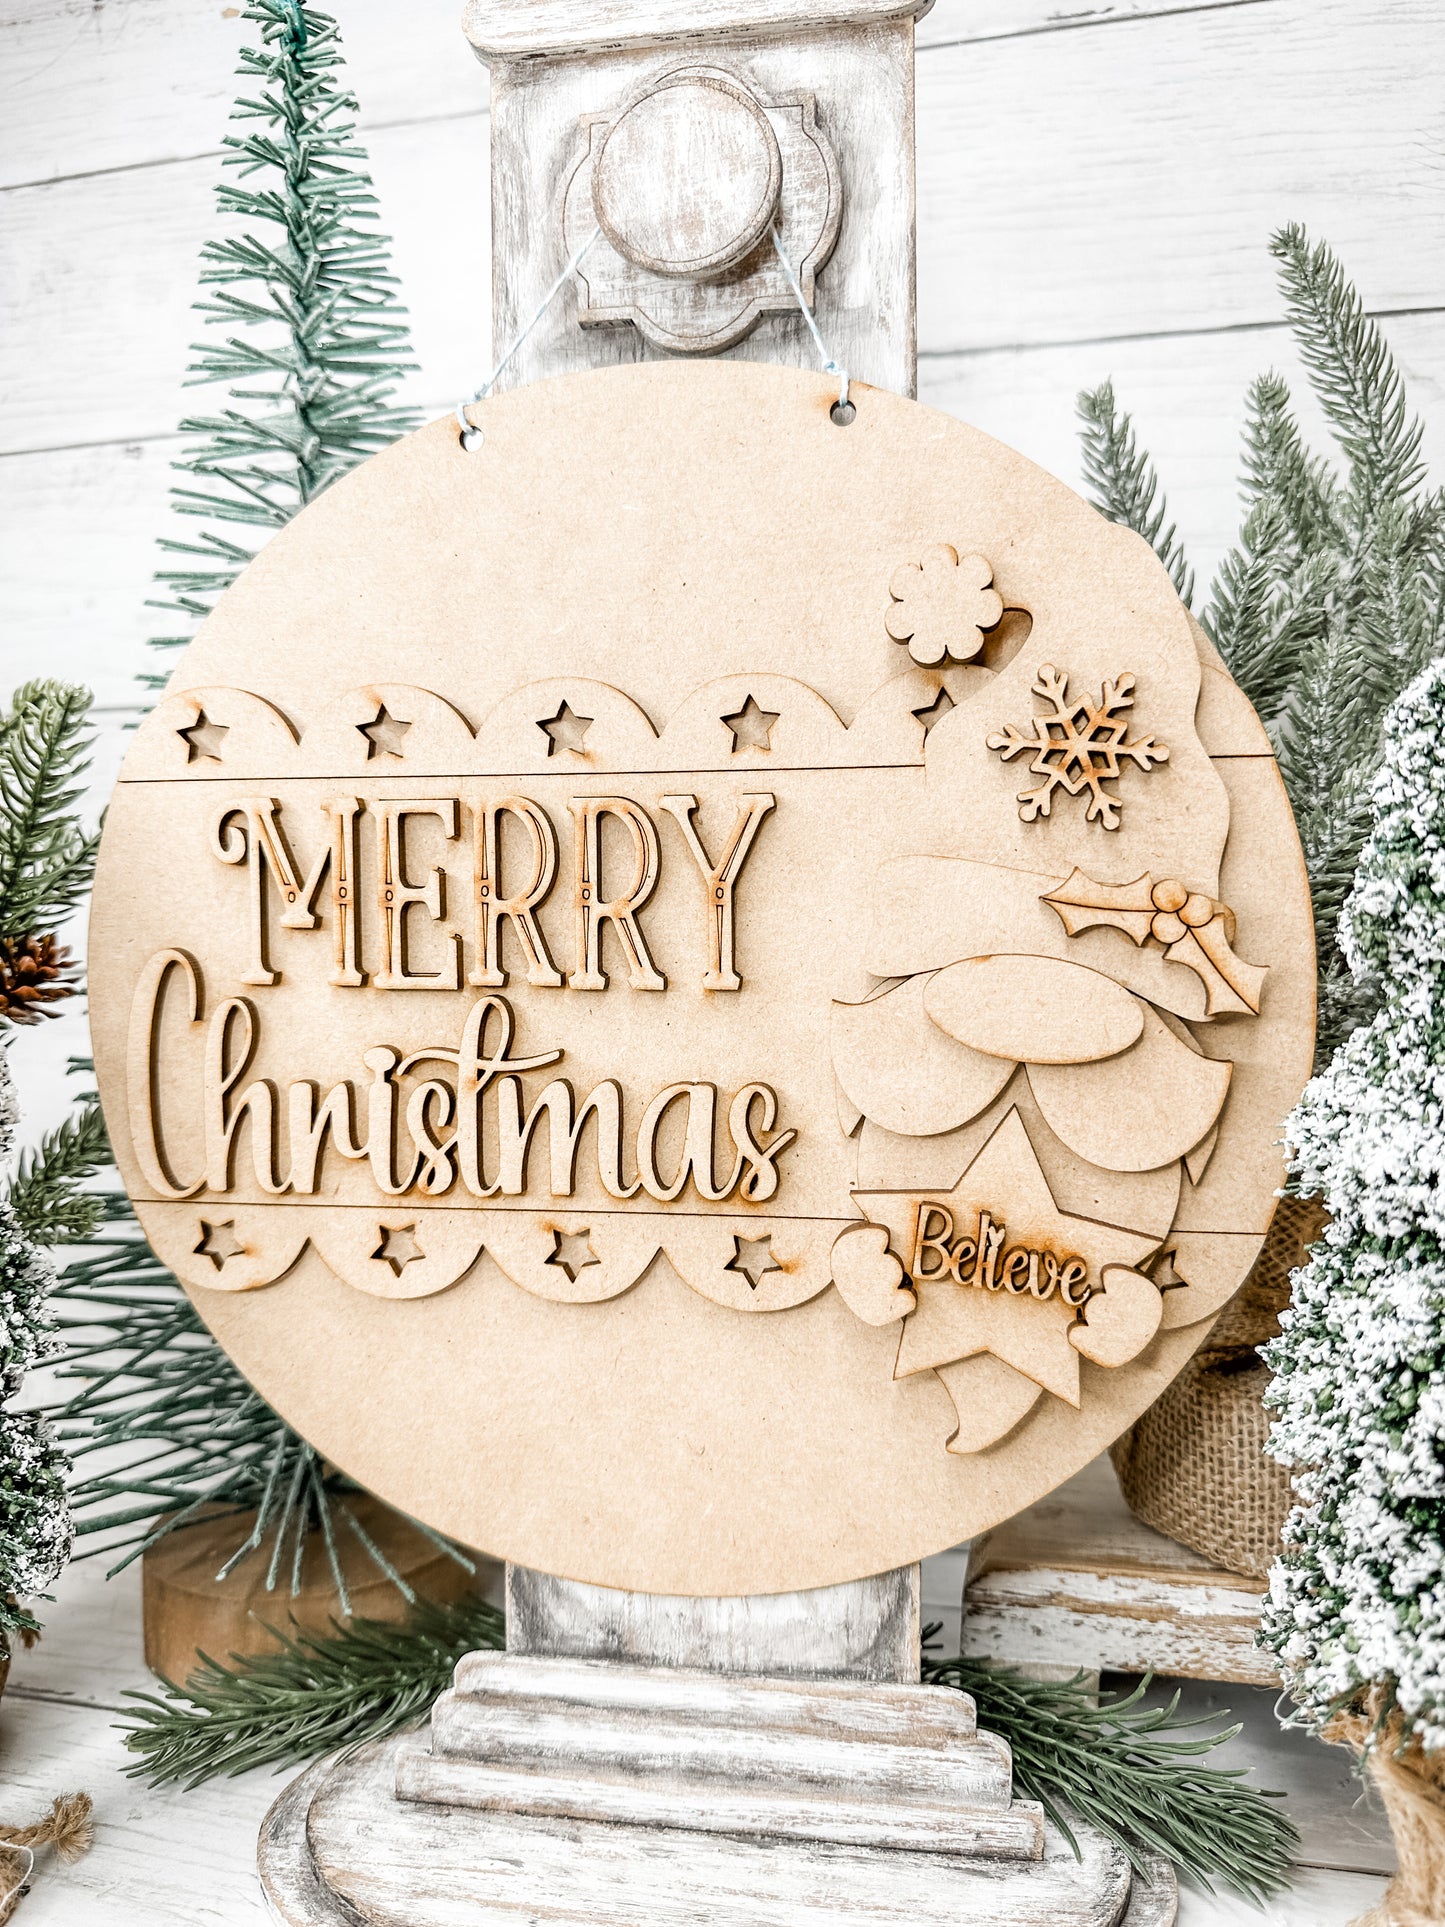 9 in round Merry Christmas Gnome Sign DIY Kit